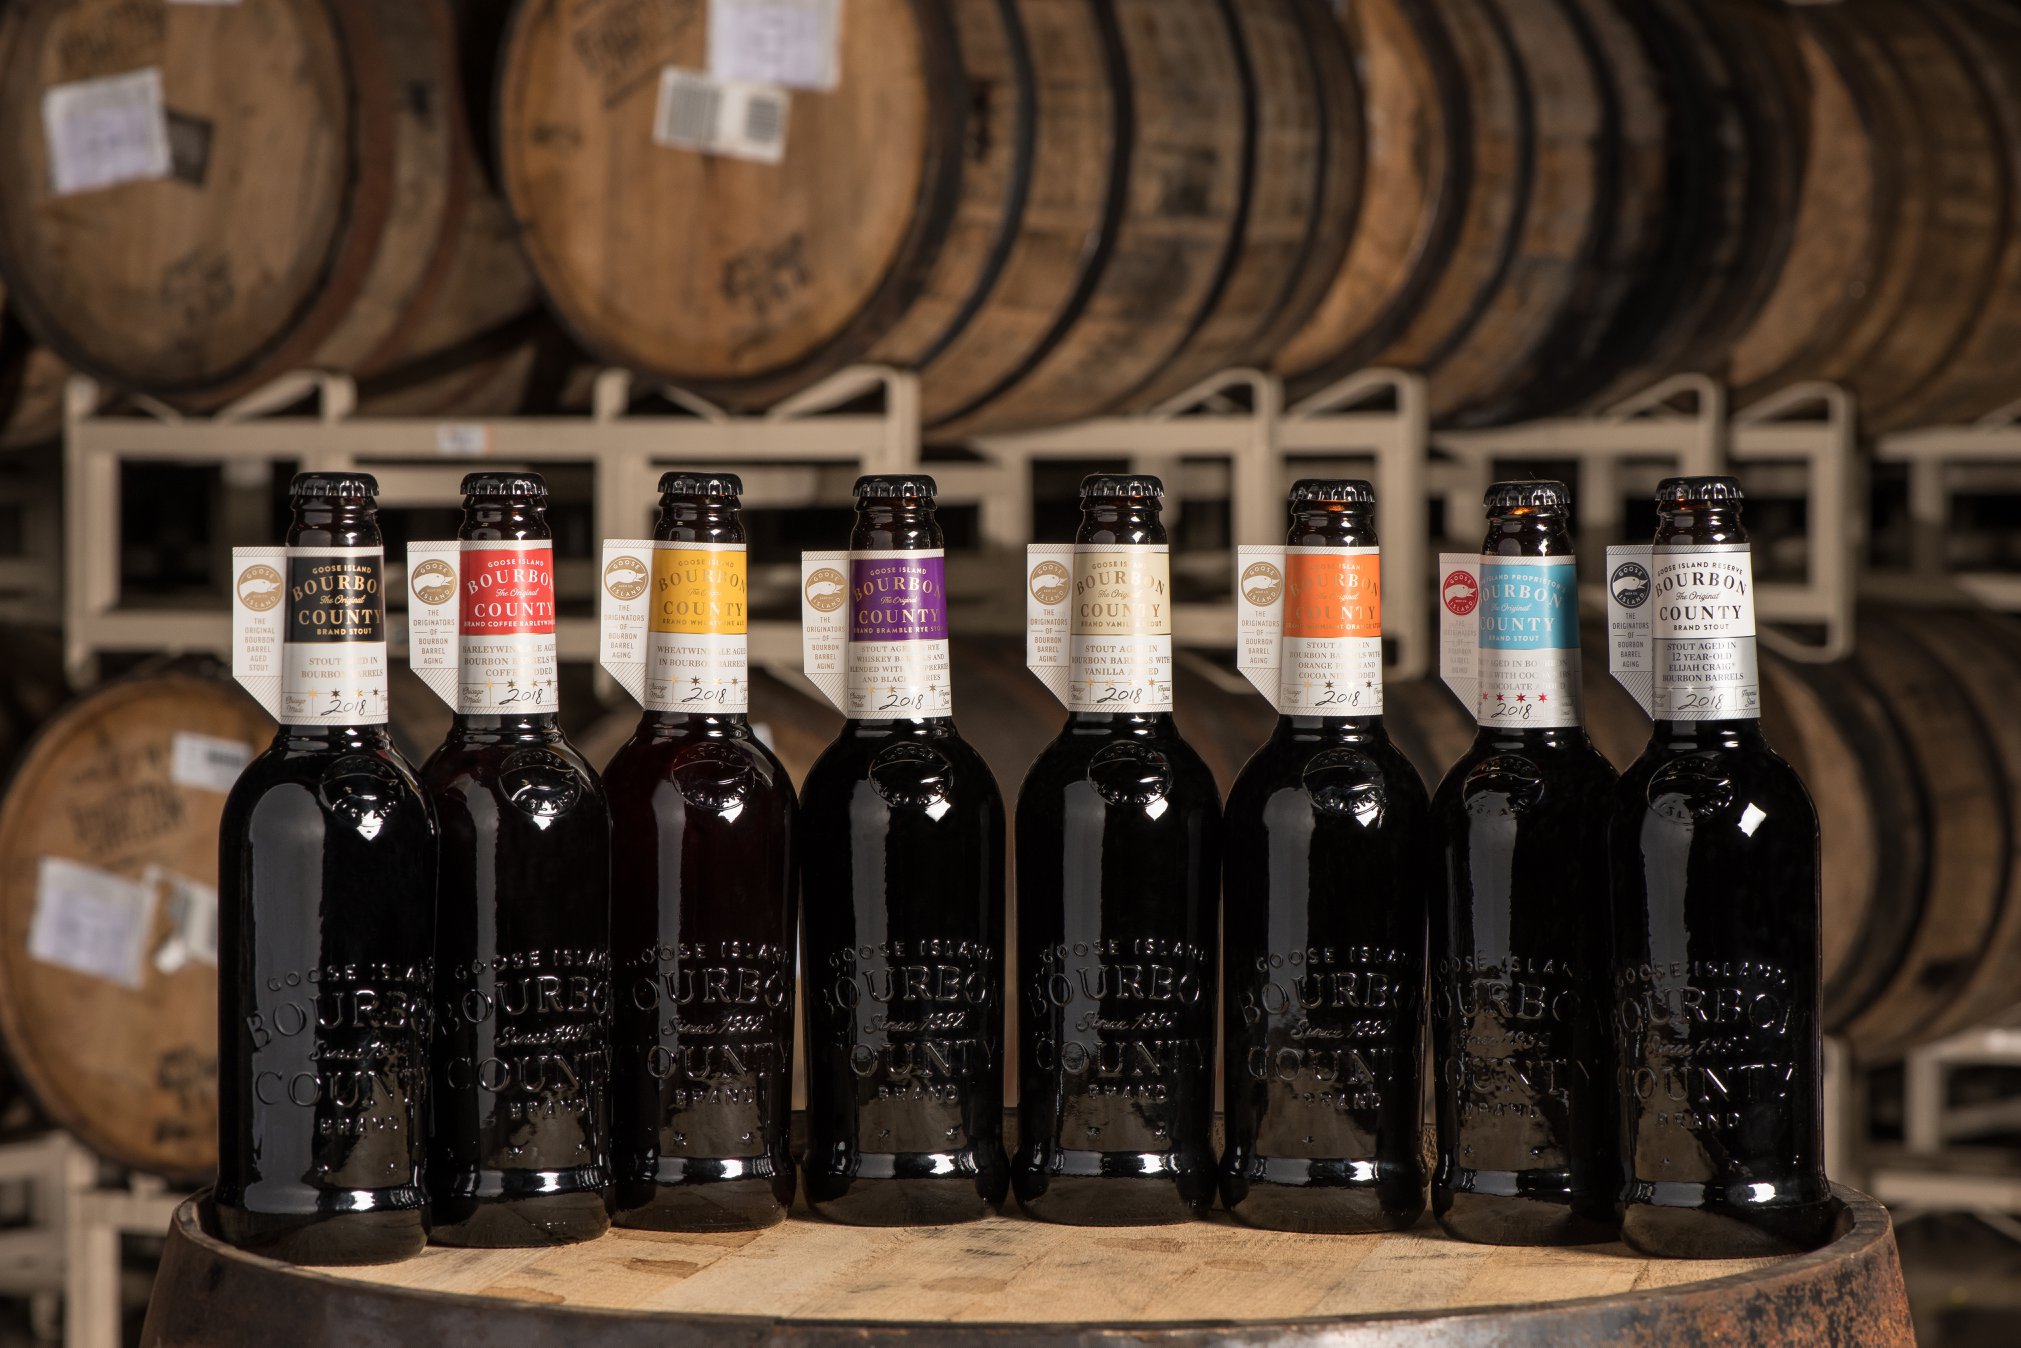 The Goose Island 2018 Bourbon County Brand Stout Lineup of barrel-aged beers courtesy of Goose Island Beer Co.